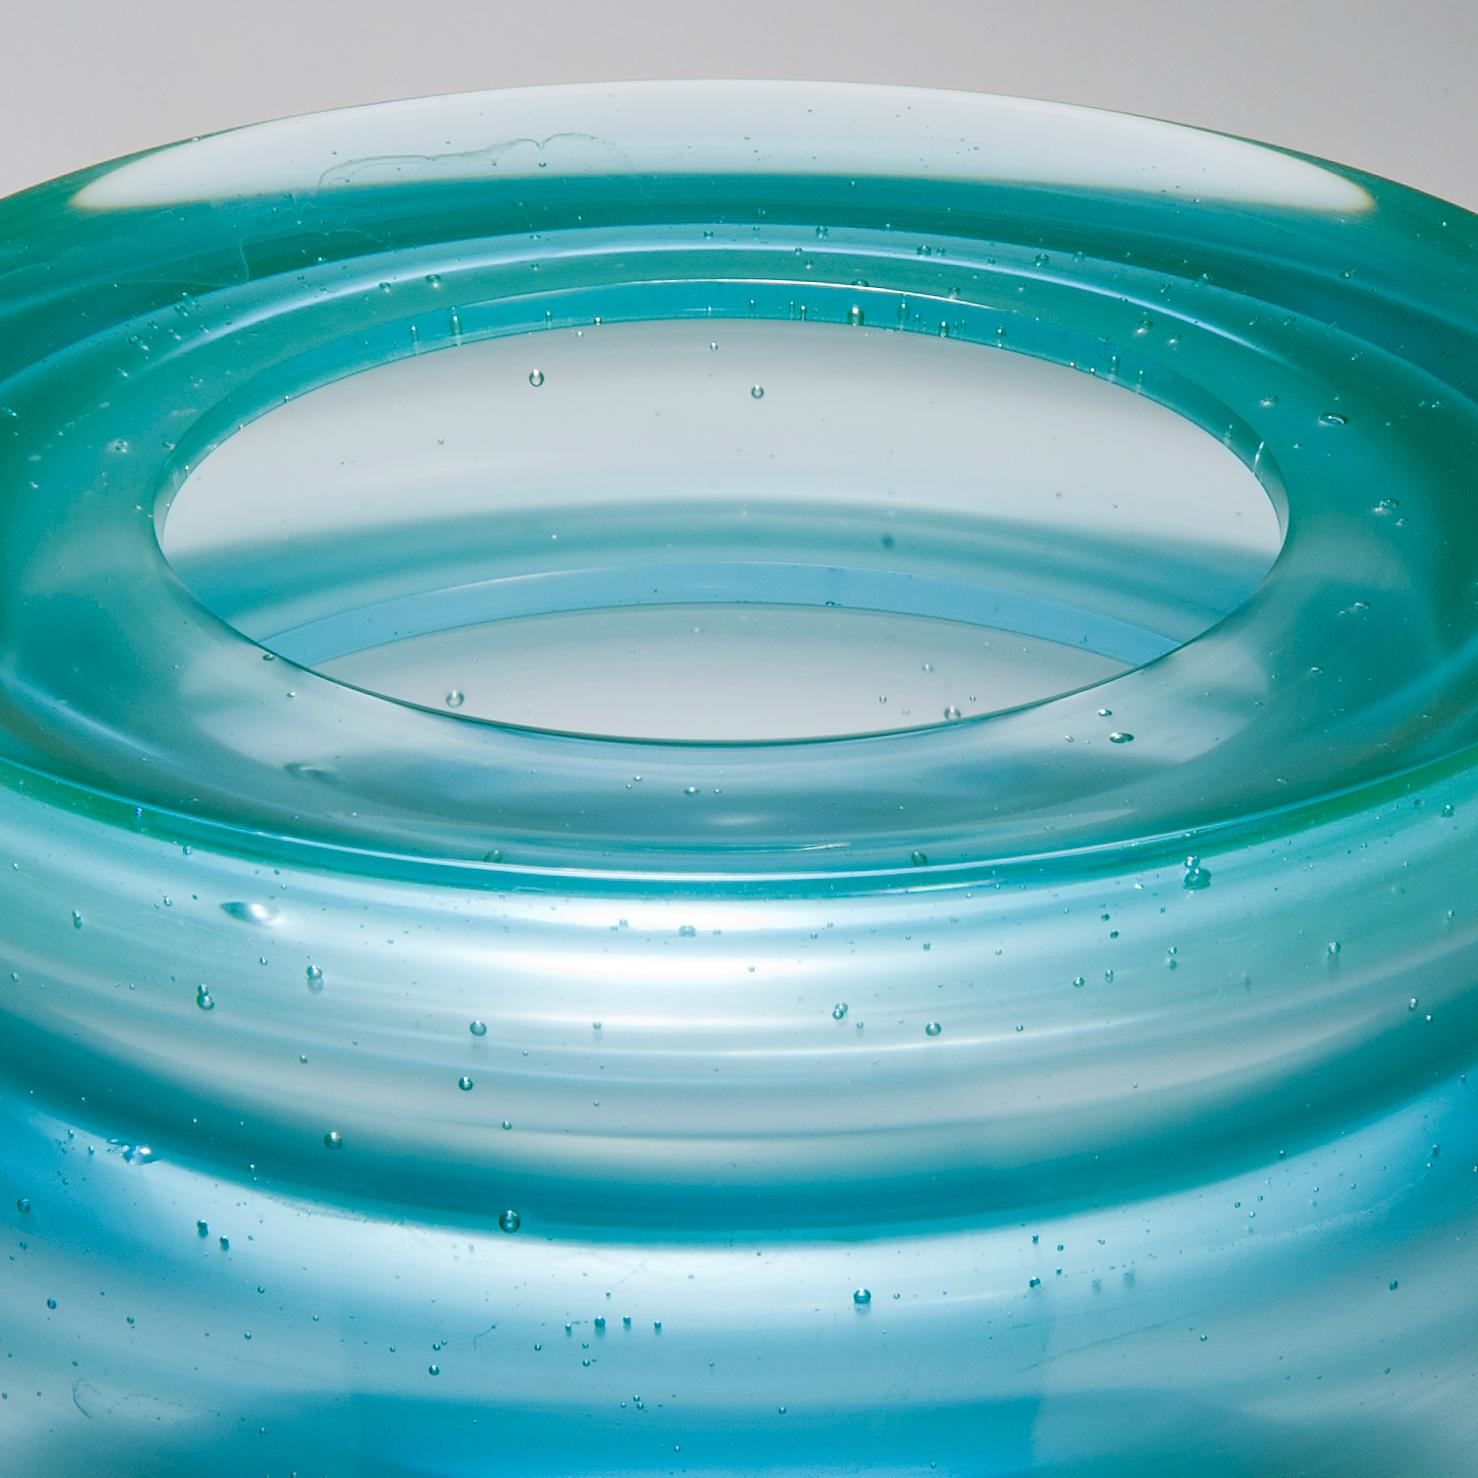 Corymb, a Unique Aqua/Turquoise Glass Art Work and Centrepiece by Paul Stopler 3